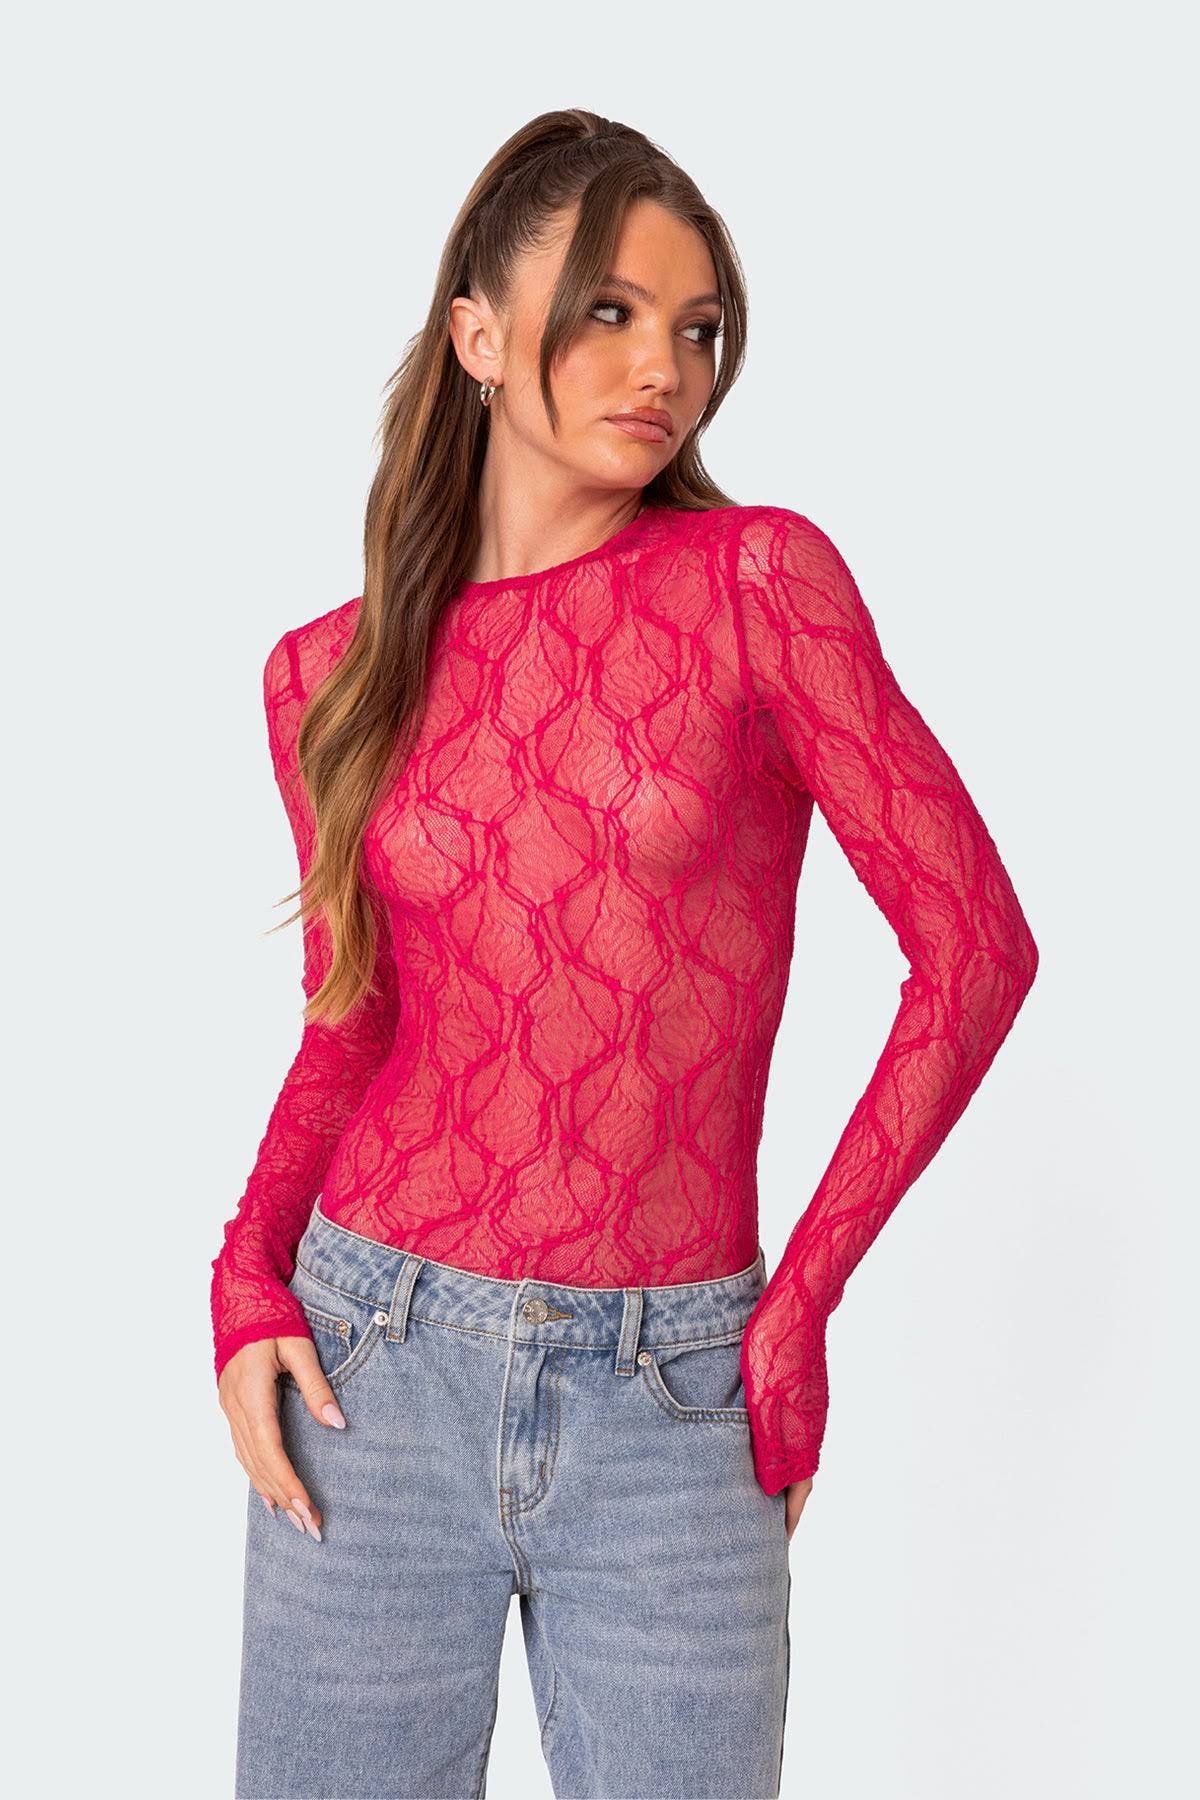 Luscious Lace Bodysuit with Jewel Neck and Long Sleeves | Image